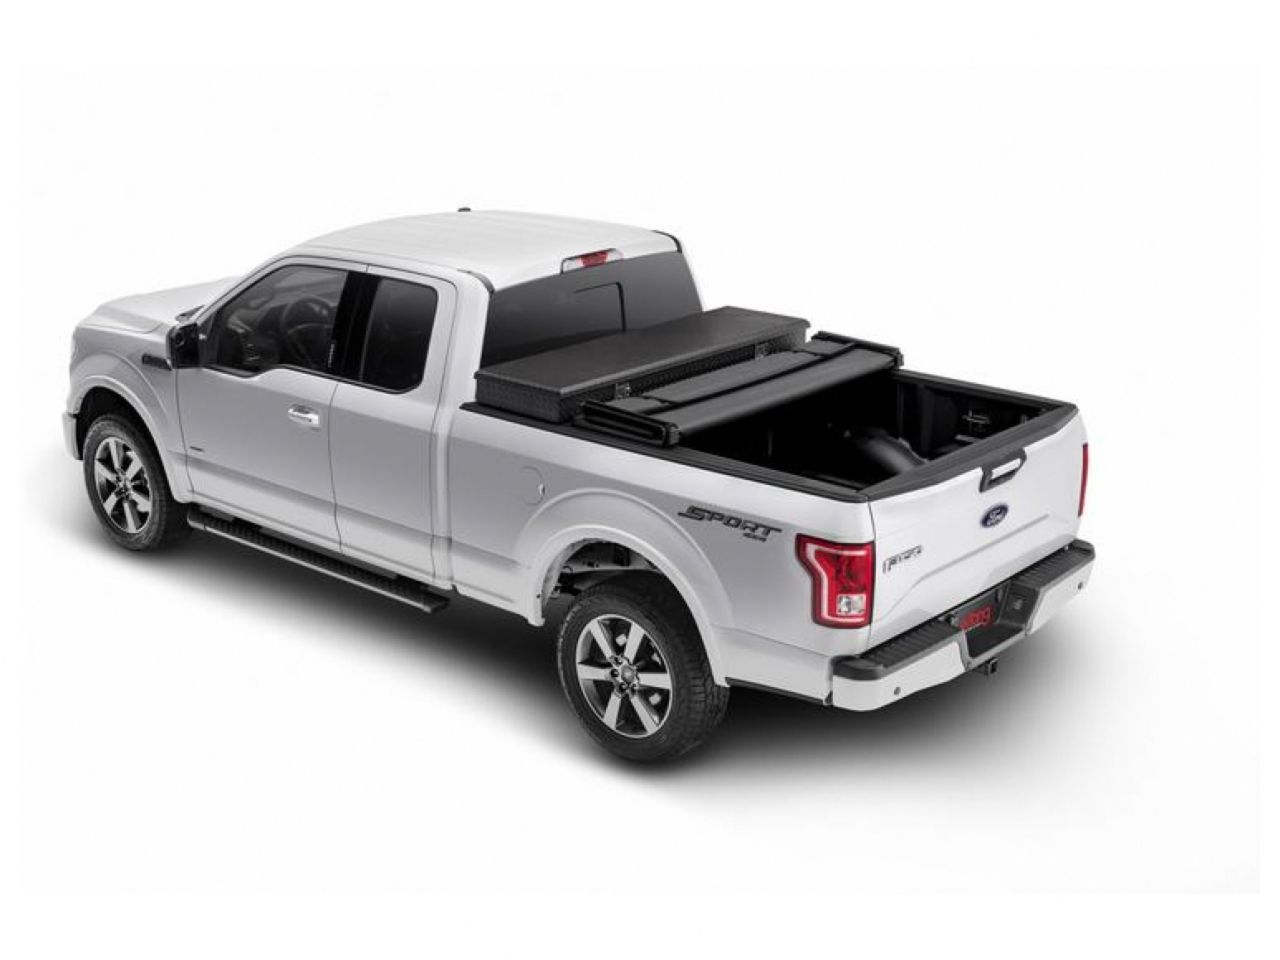 Extang Trifecta Toolbox 2.0 - Nissan Titan XD (6.5') 16-19 (w/out rail system